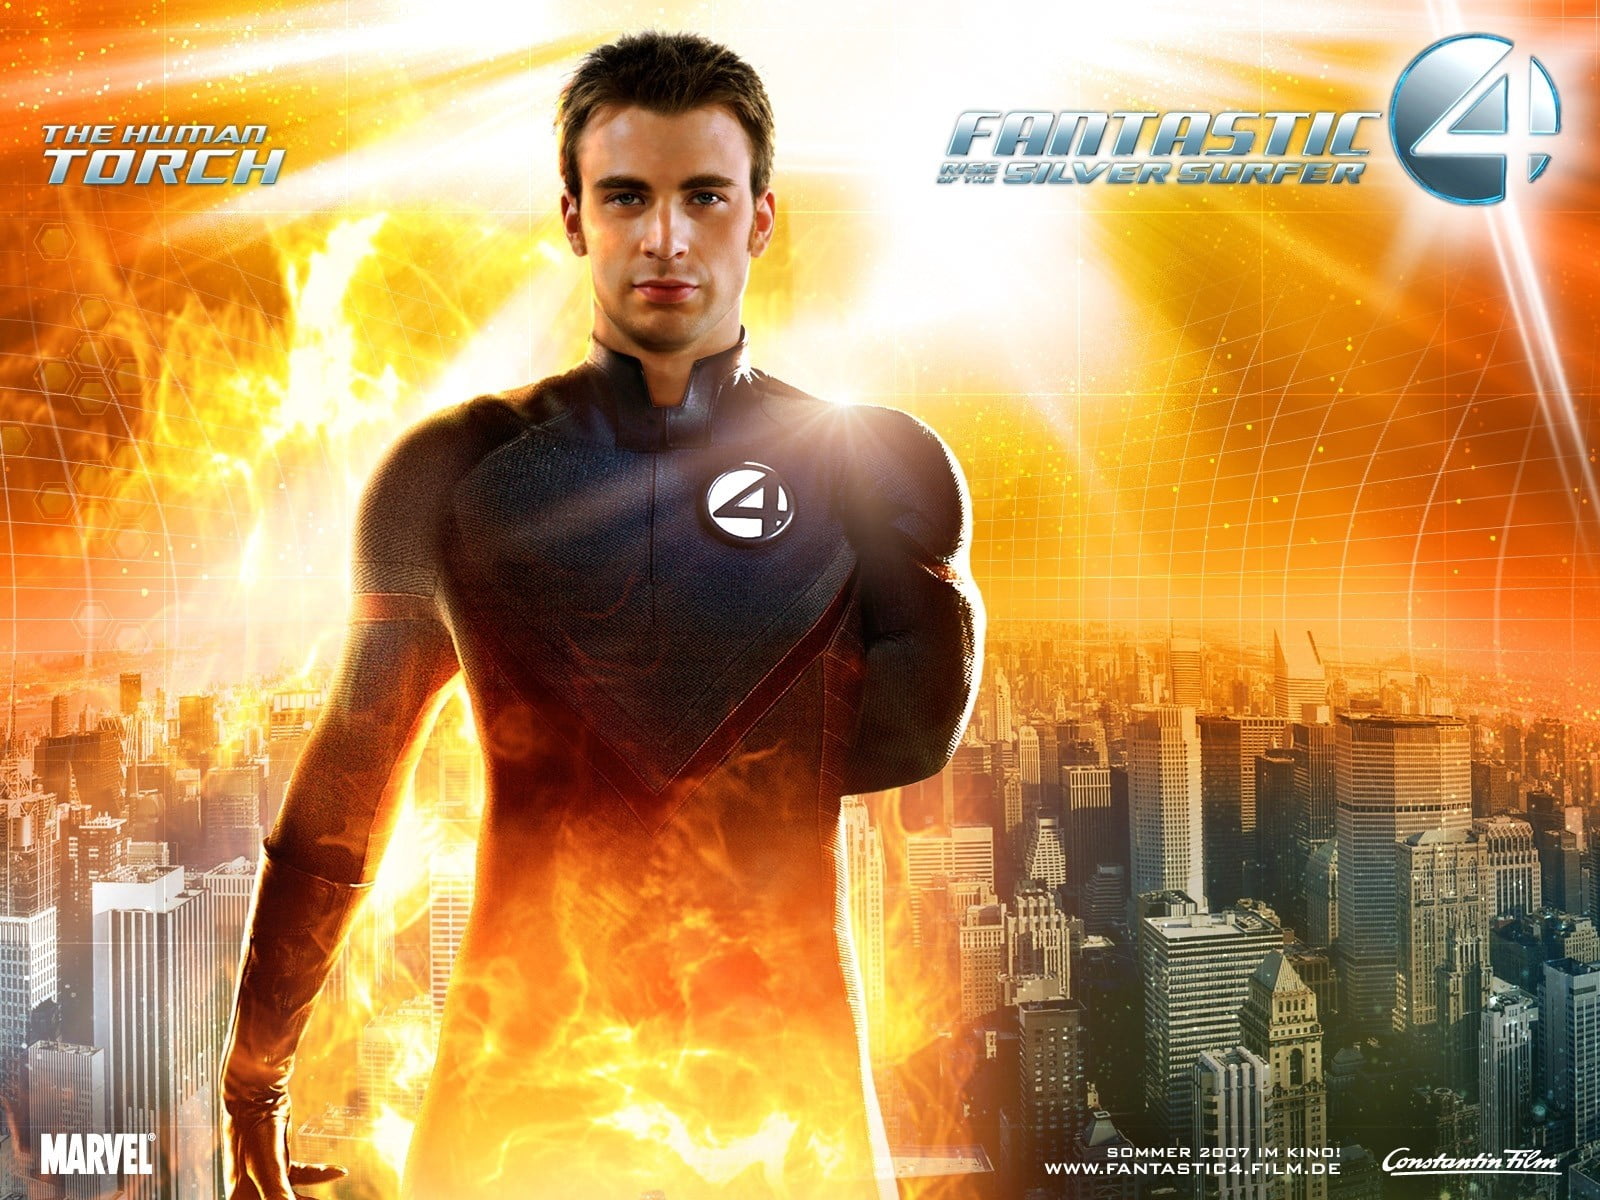 Fantastic 4, Chris evans, Human torch, Johnny storm, Rise of the silver surfer